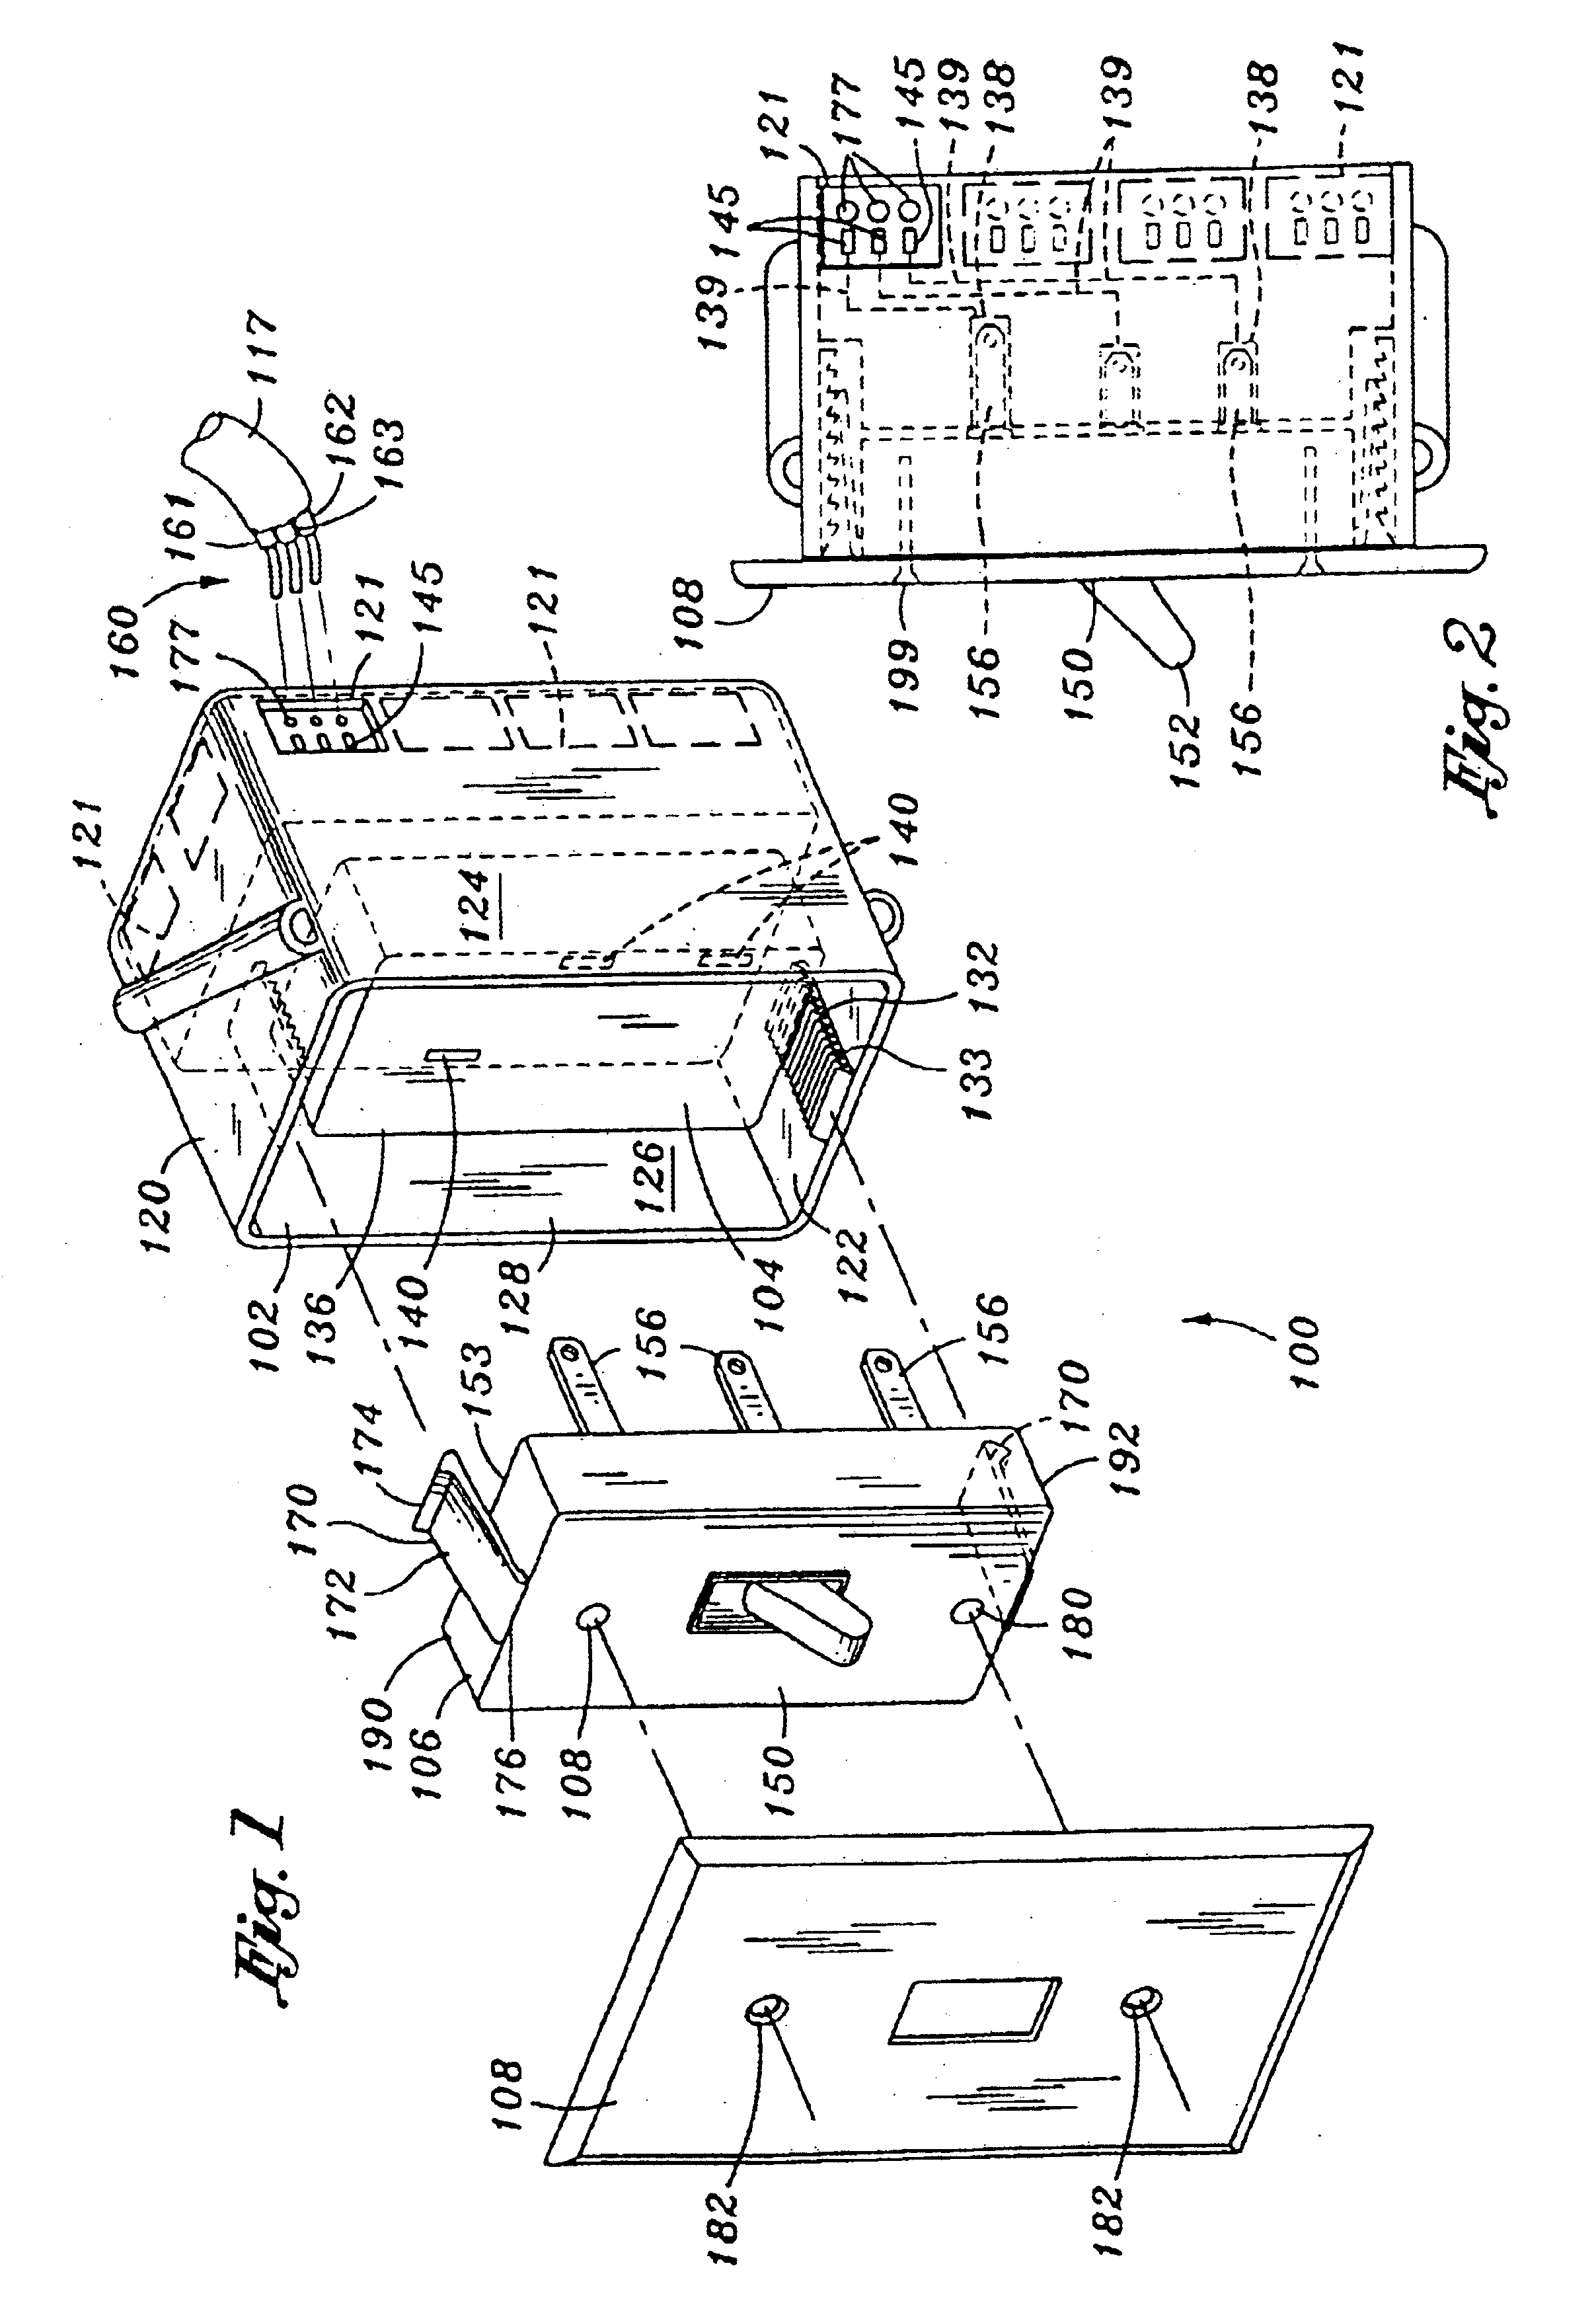 Prewired electrical apparatus having quick connect components